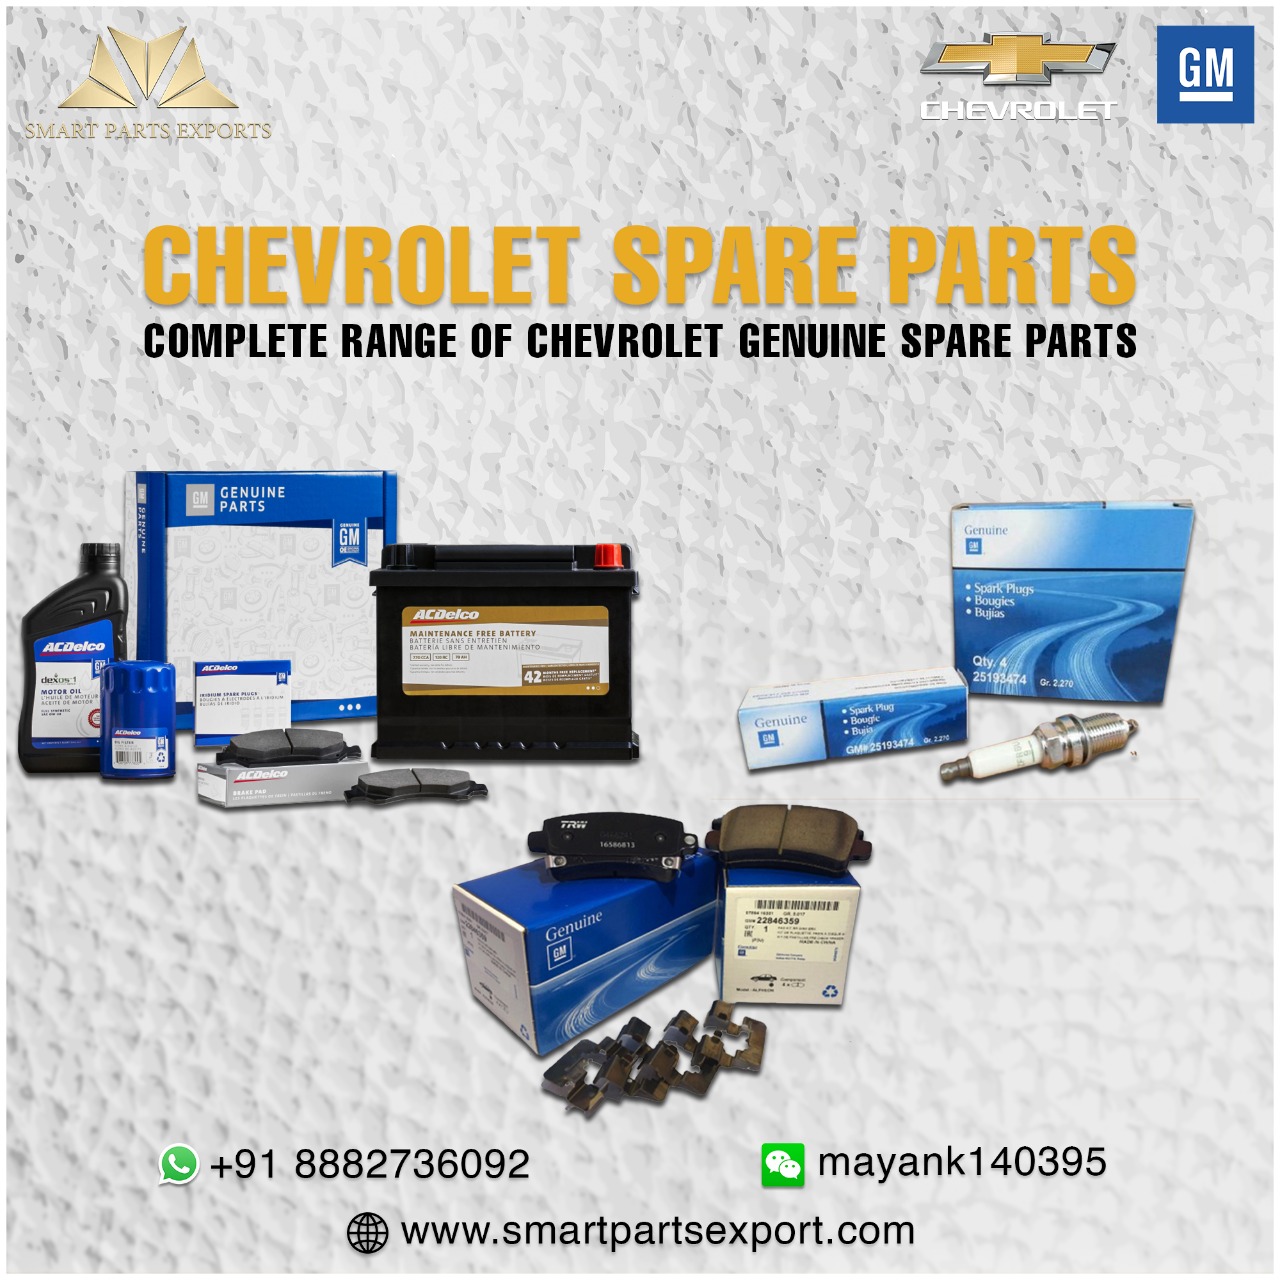 Genuine Chevrolet Parts In Bolivia By An Exporter